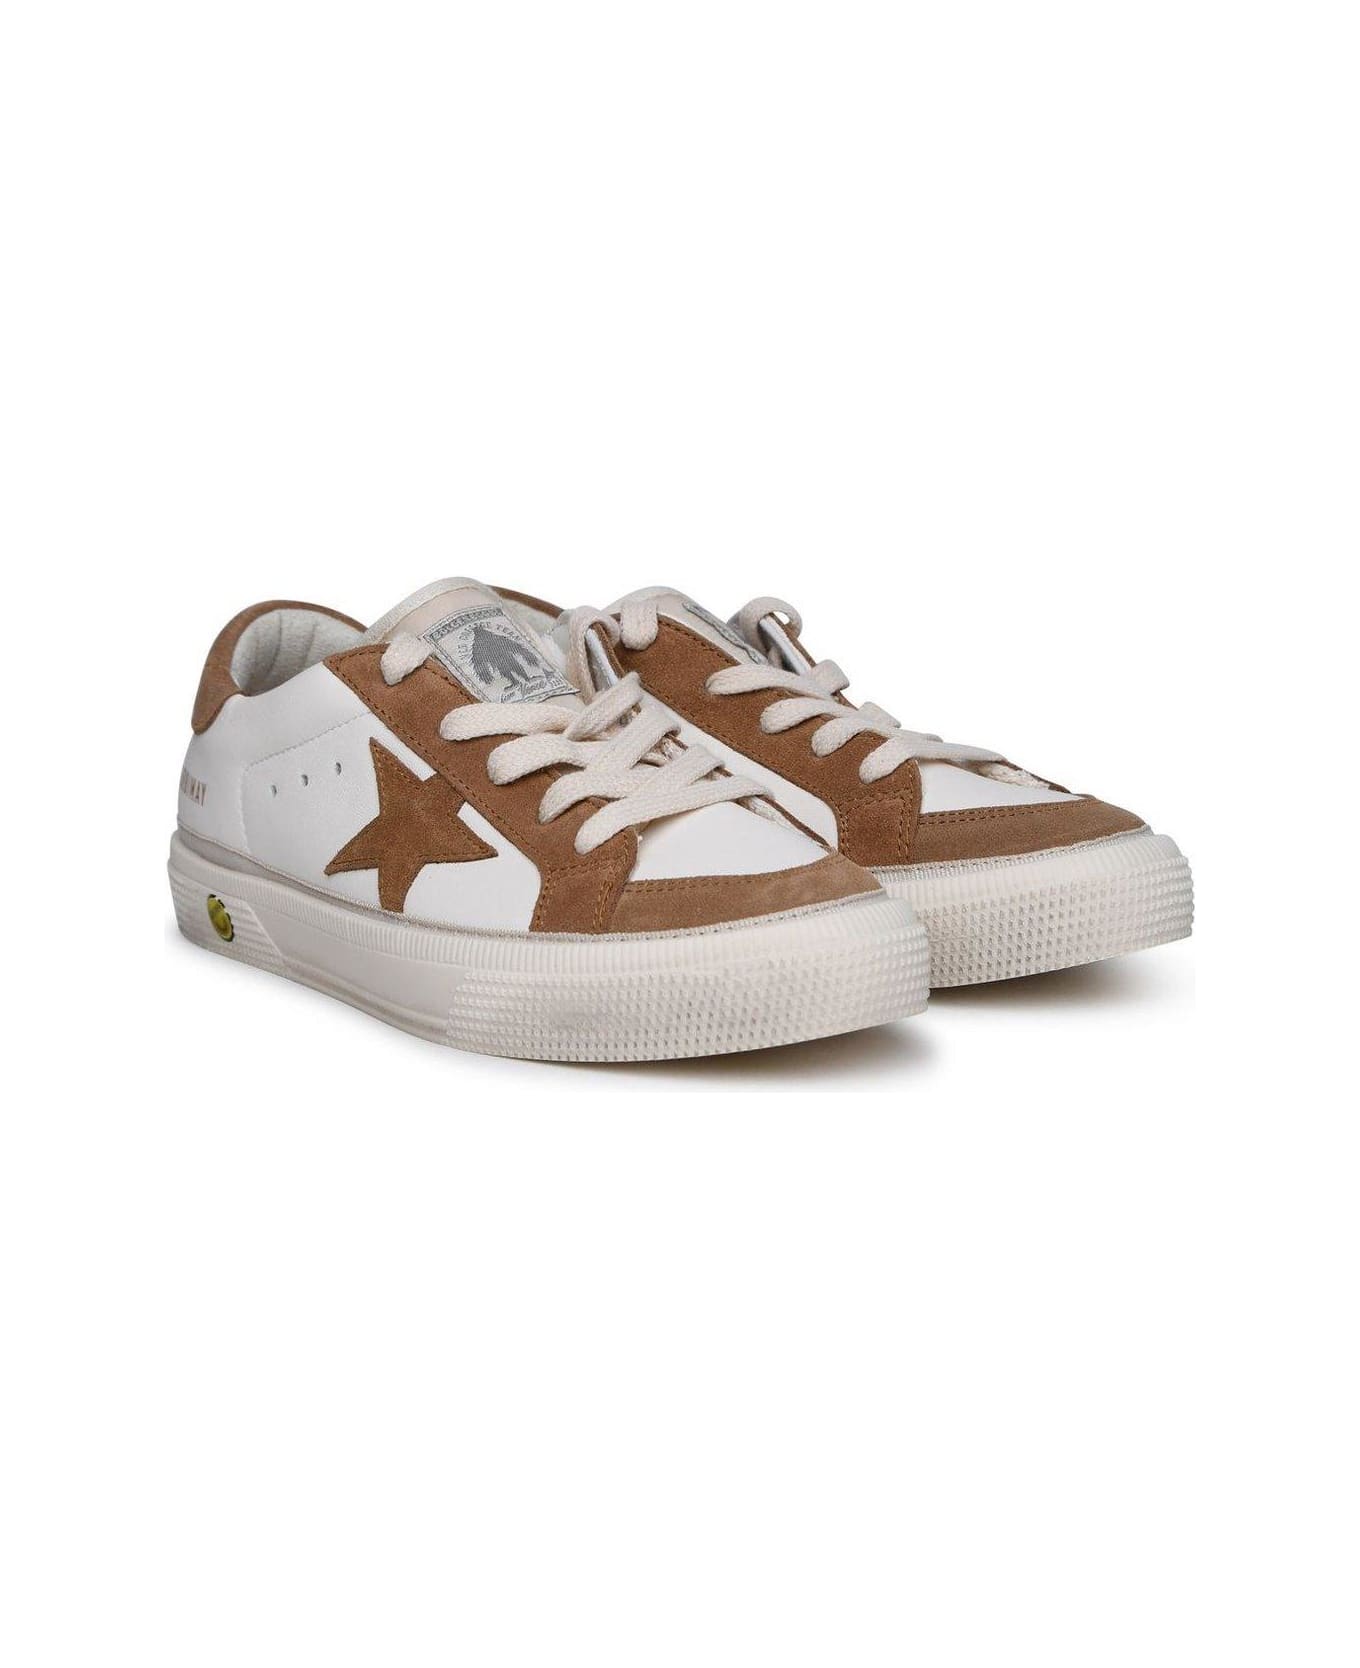 Golden Goose Superstar Lace-up Sneakers - White/Light Brown